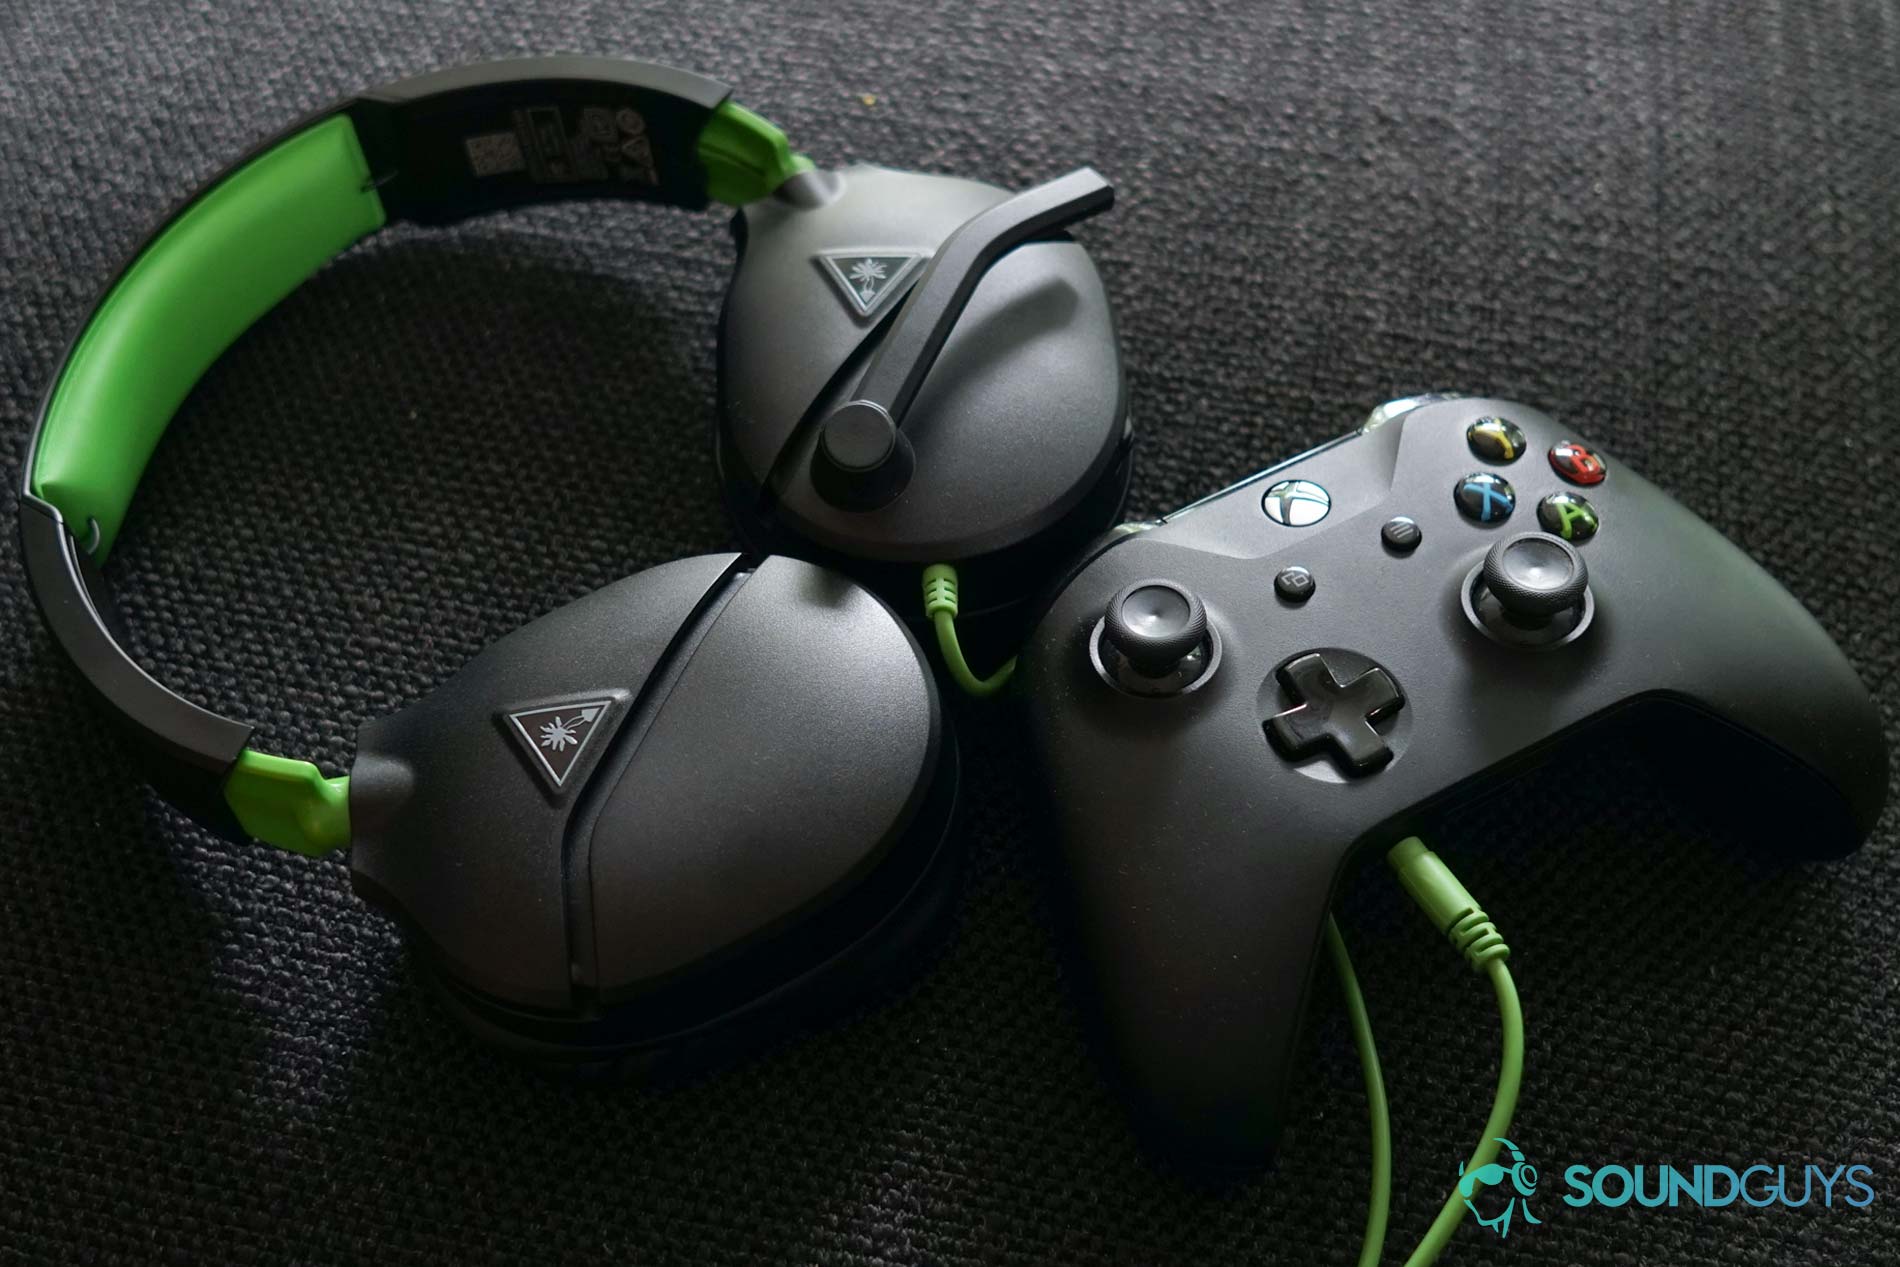 The Turtle Beach Recon 70 gaming headset plugged into an Xbox One controller.